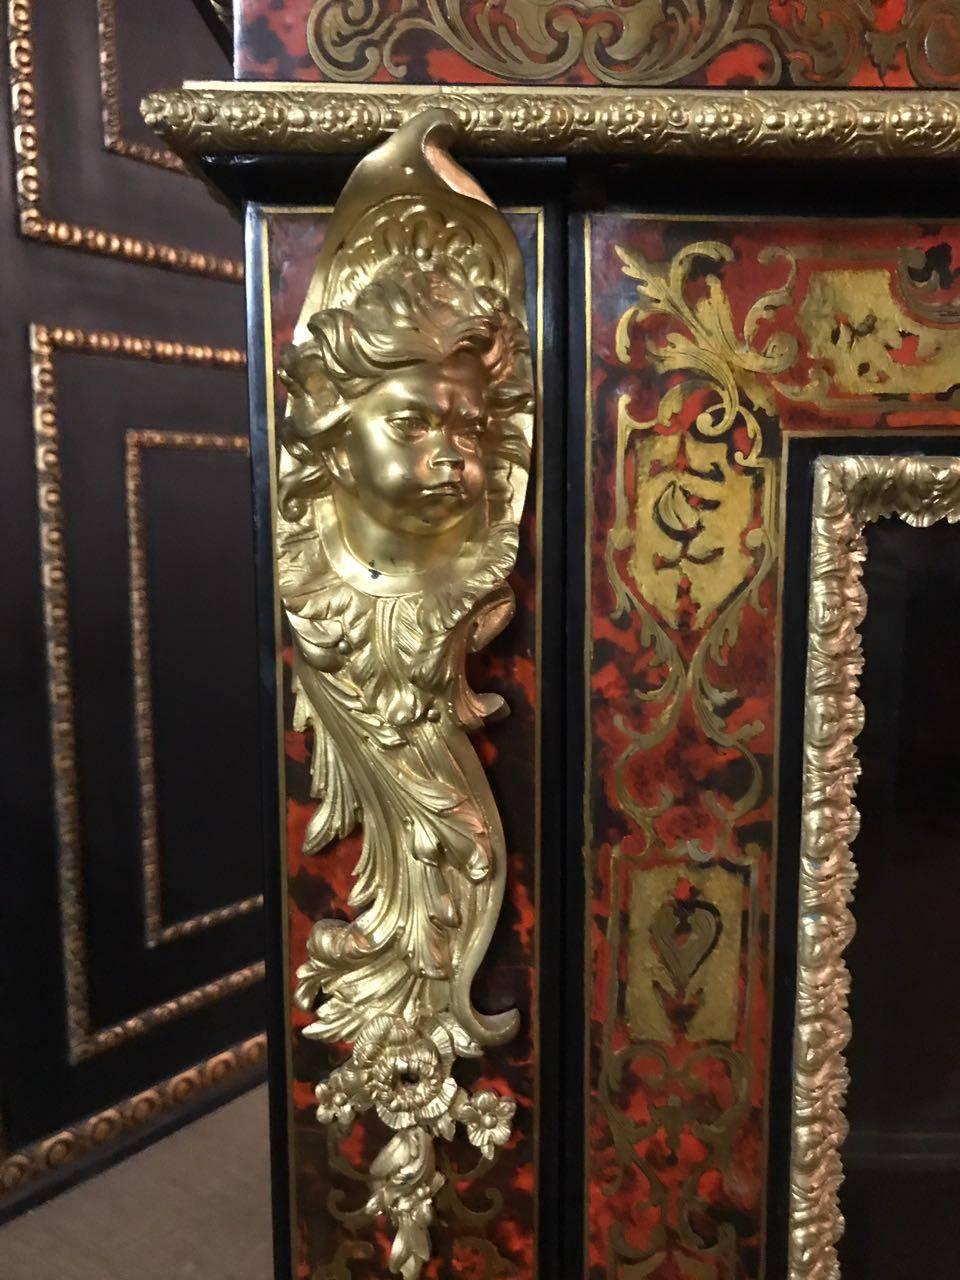 Boulle Meuble de Appui / cabinet cabinet in the style Louis Quatorze Napoleon III Paris, circa 1850-1880
The high-quality, chased fire-gilded bronze are distinctive and of exceptionally good quality. Ebonised solid oakwood with brass inlays Boulle